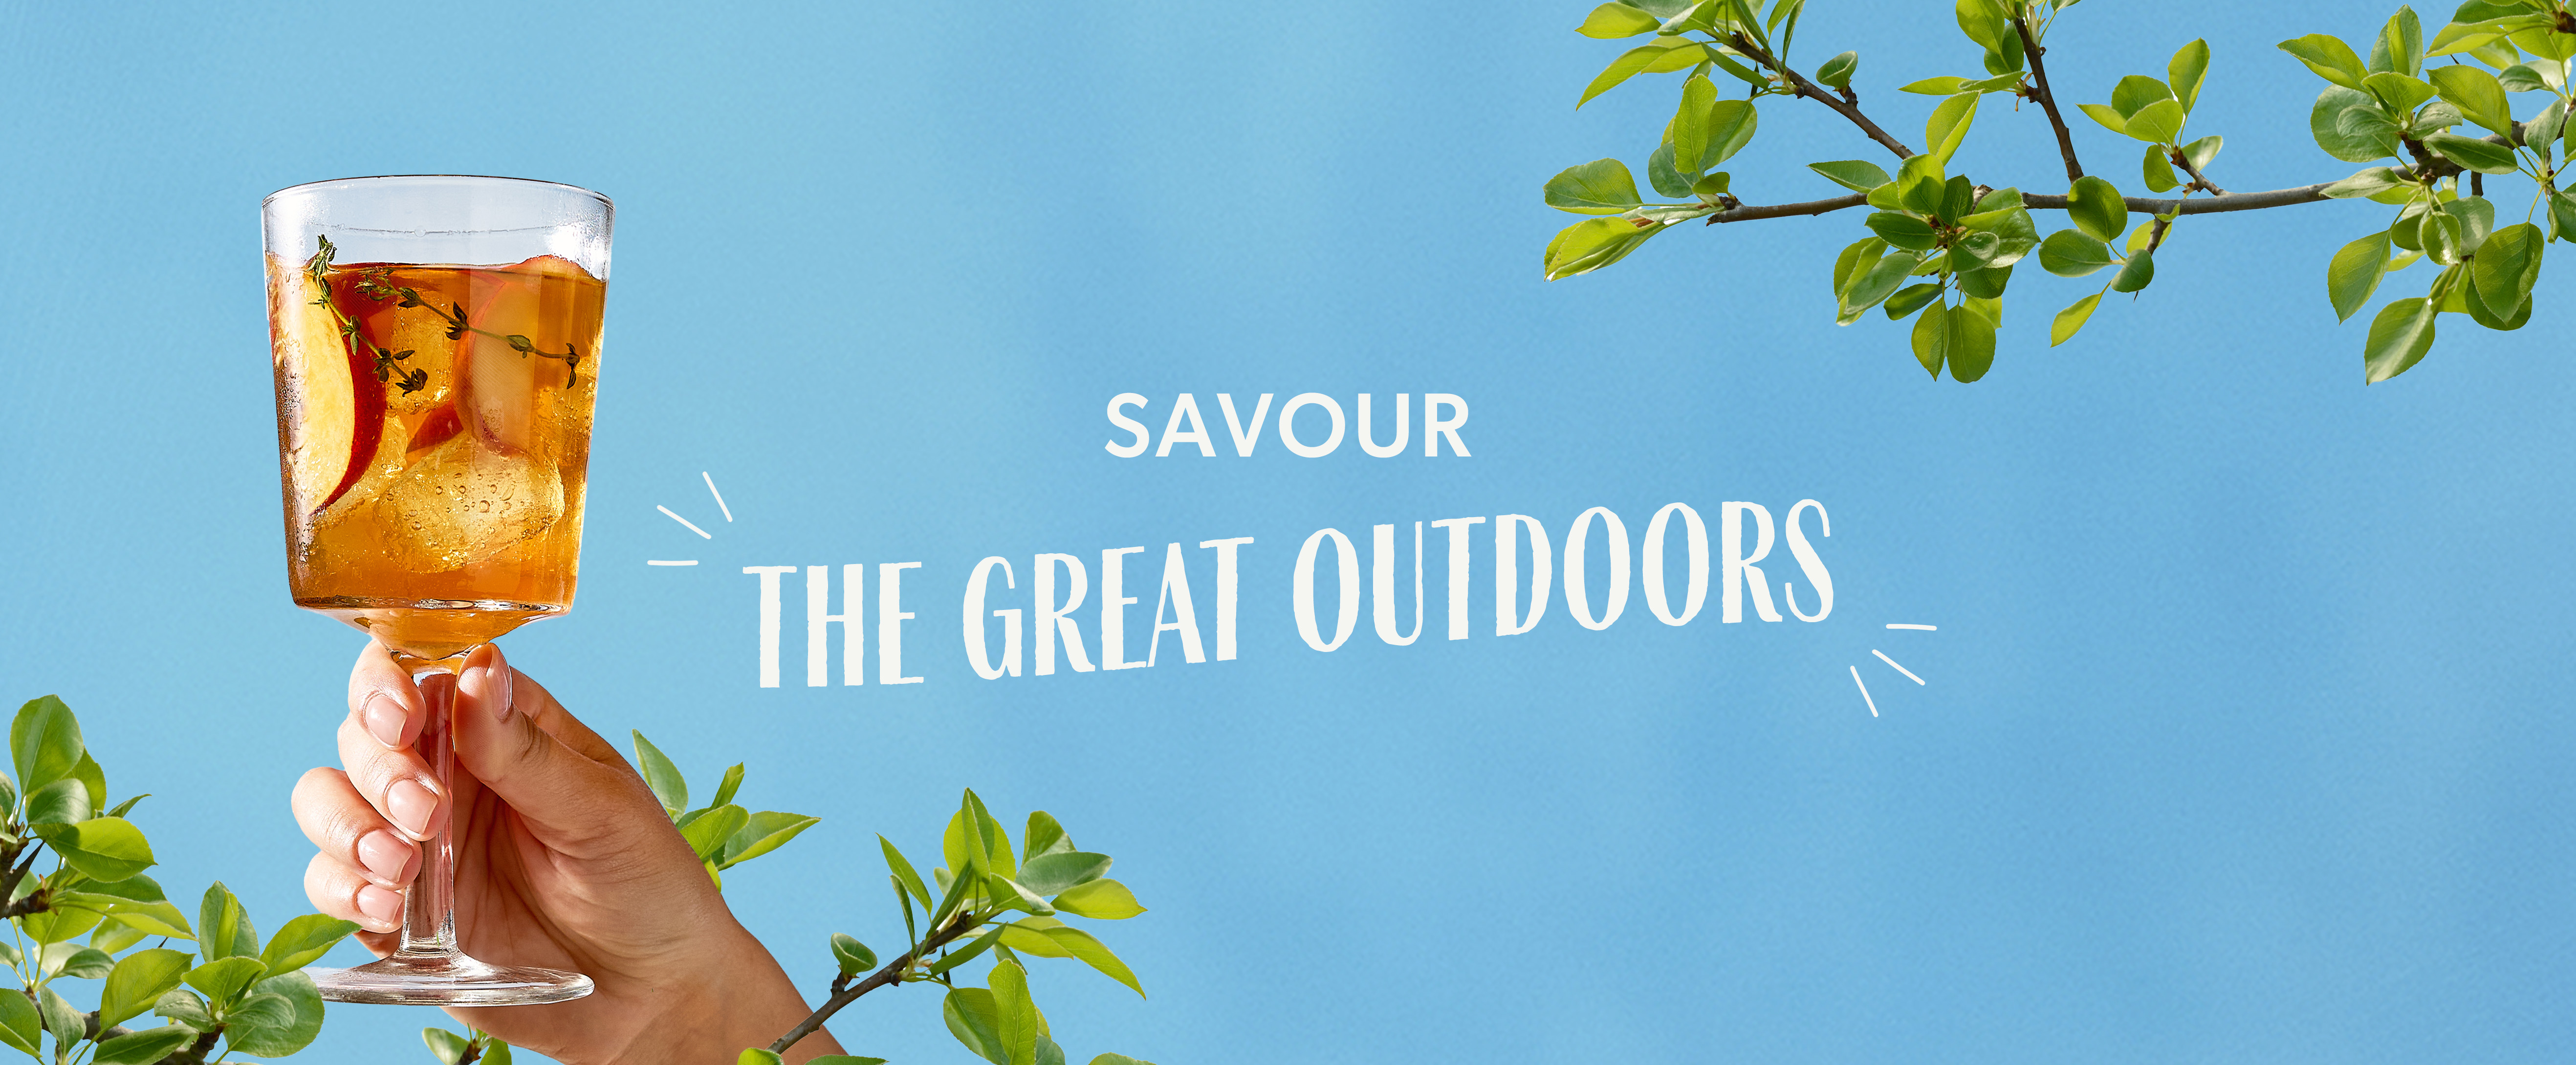 Peach iced tea with text Savour the great outdoors